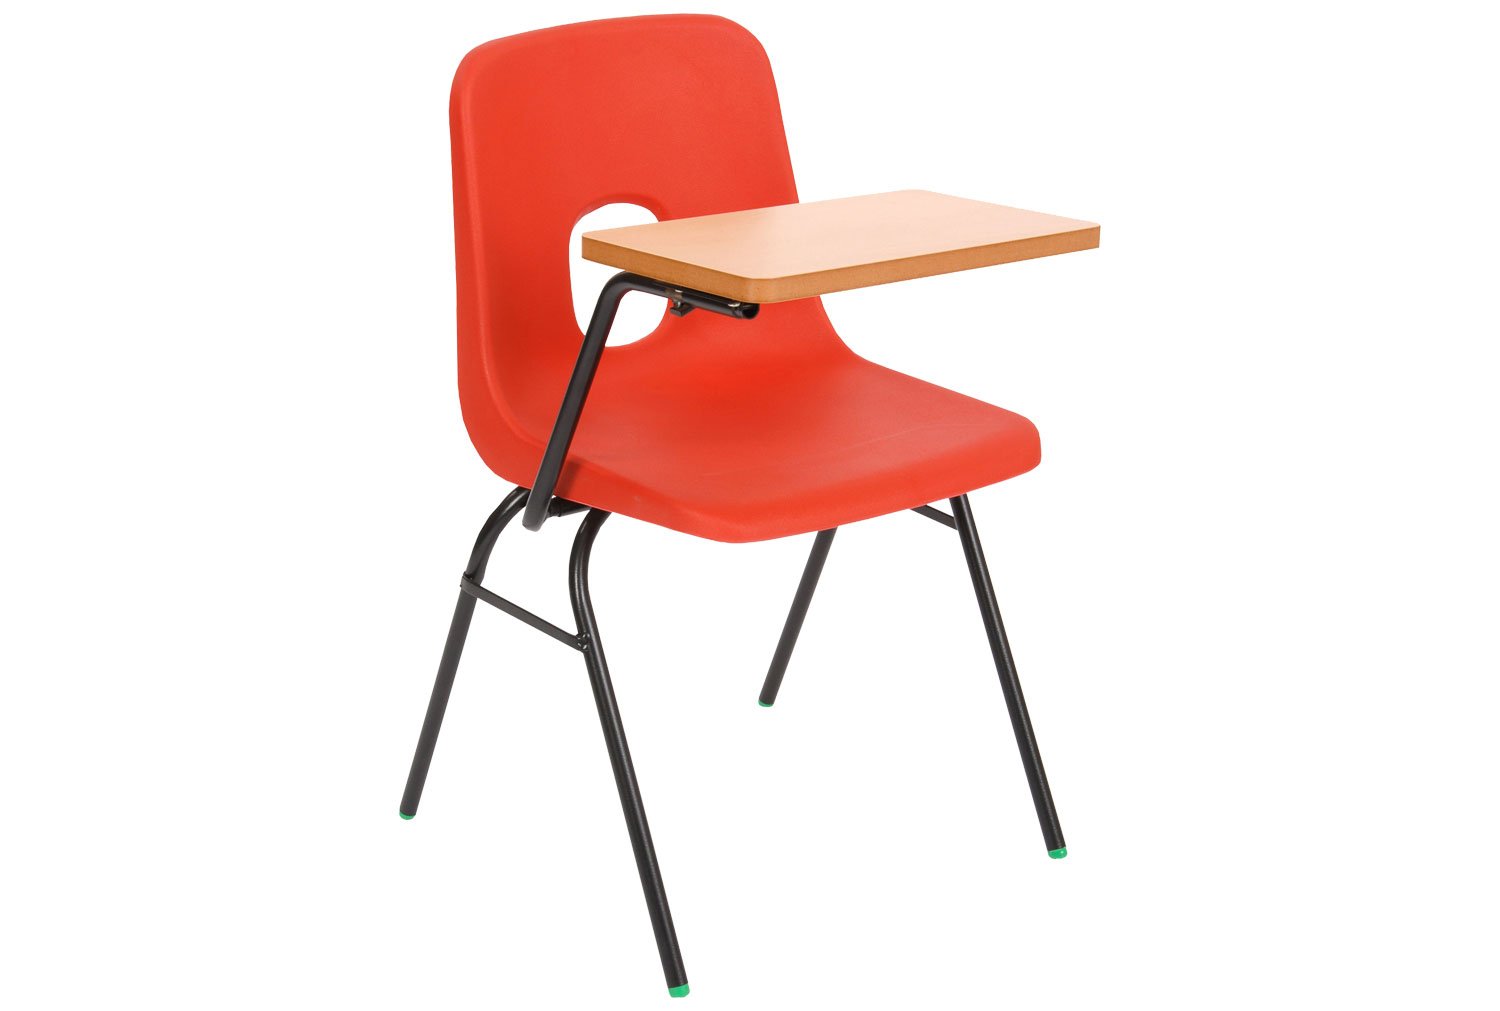 Qty 8 - Hille E Series Classroom Chair With Writing Tablet, 14+ Years - 41wx37dx46h (cm), Black Frame, Black